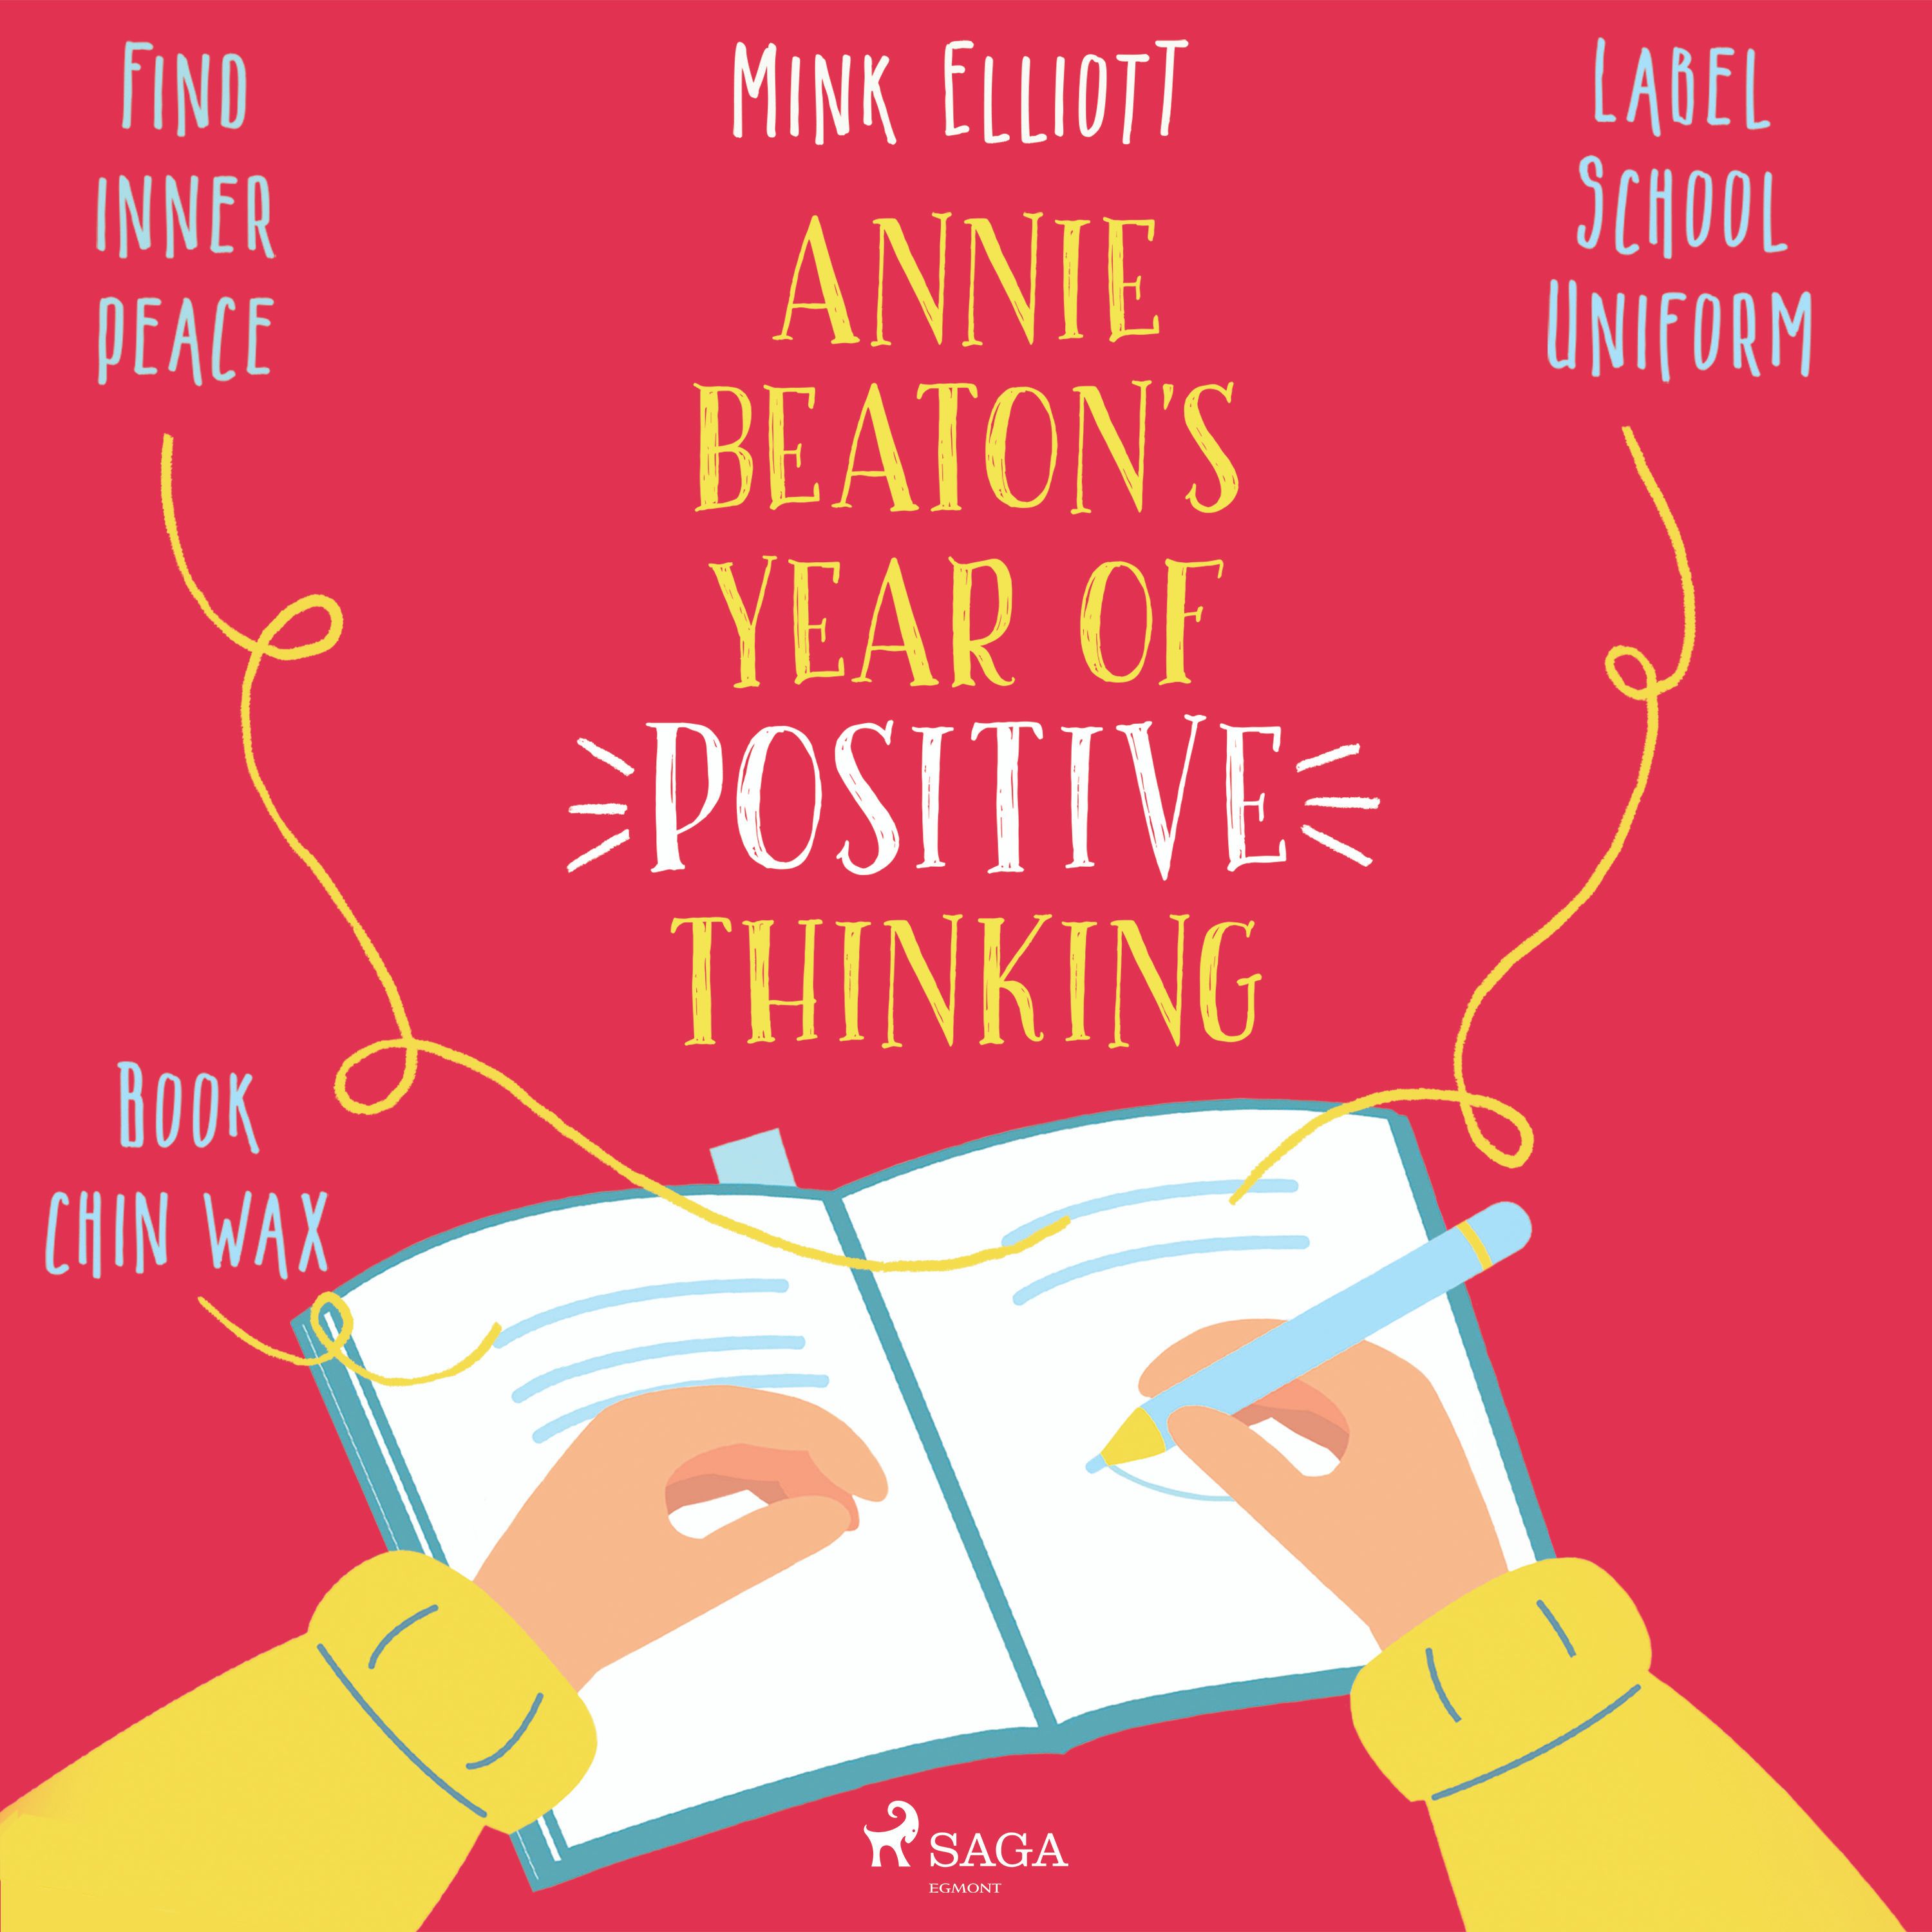 Annie Beaton's Year of Positive Thinking, audiobook by Mink Elliott